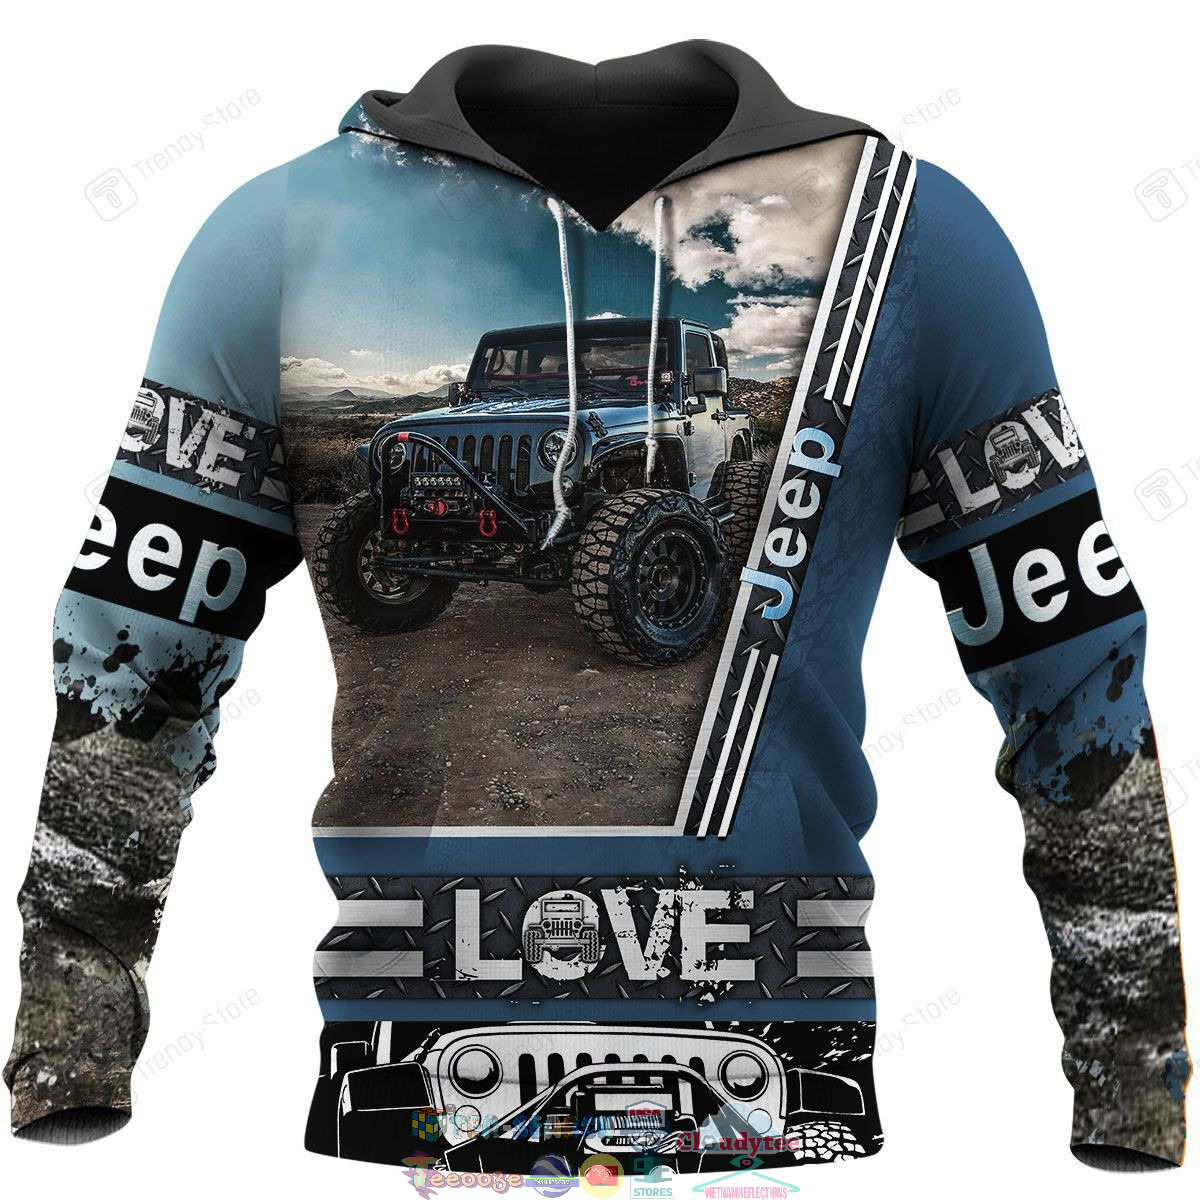 KawfynAo-TH050822-21xxxJeep-ver-5-3D-hoodie-and-t-shirt3.jpg